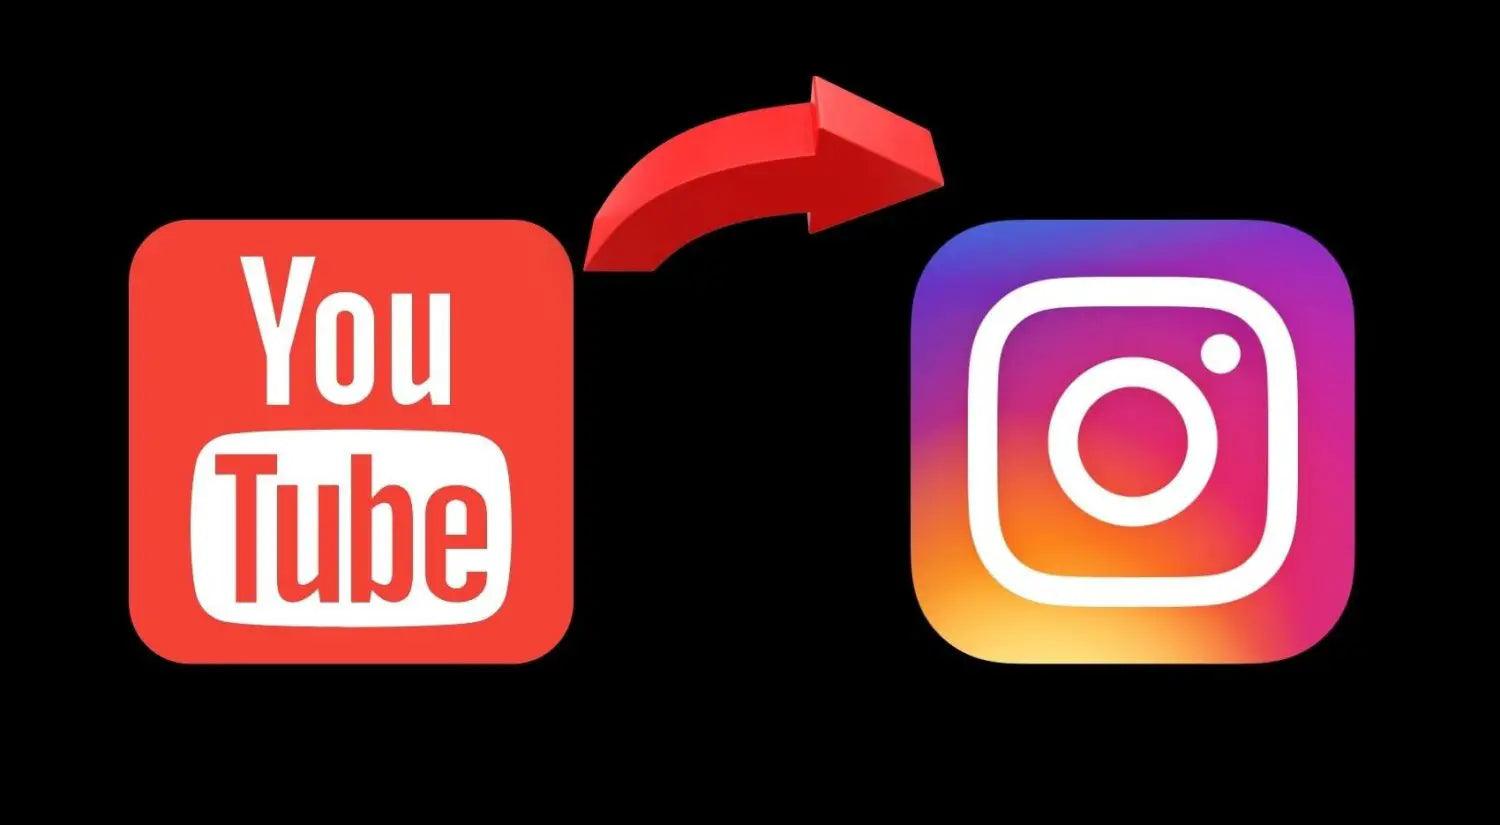 How to Share YouTube Videos on Instagram;;folx youtube videos to instagram;;;uplet youtube videos to instagram;;